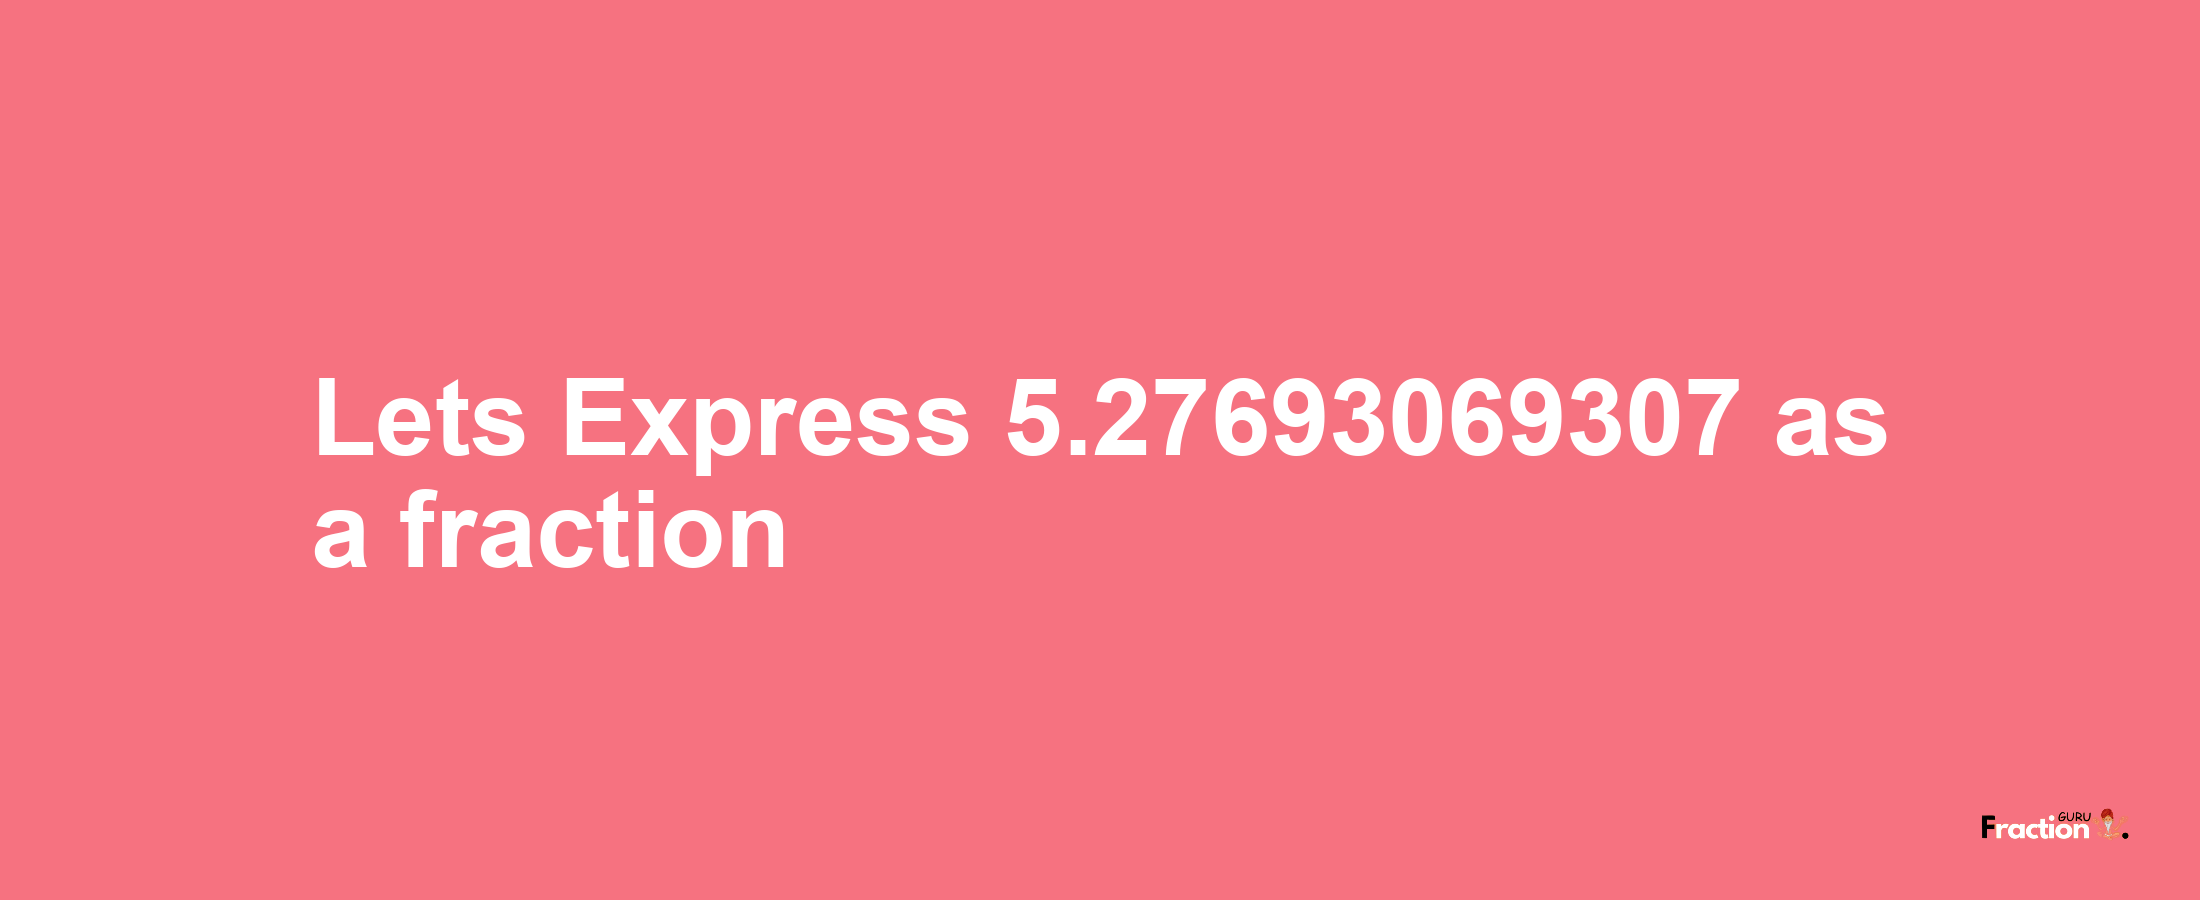 Lets Express 5.27693069307 as afraction